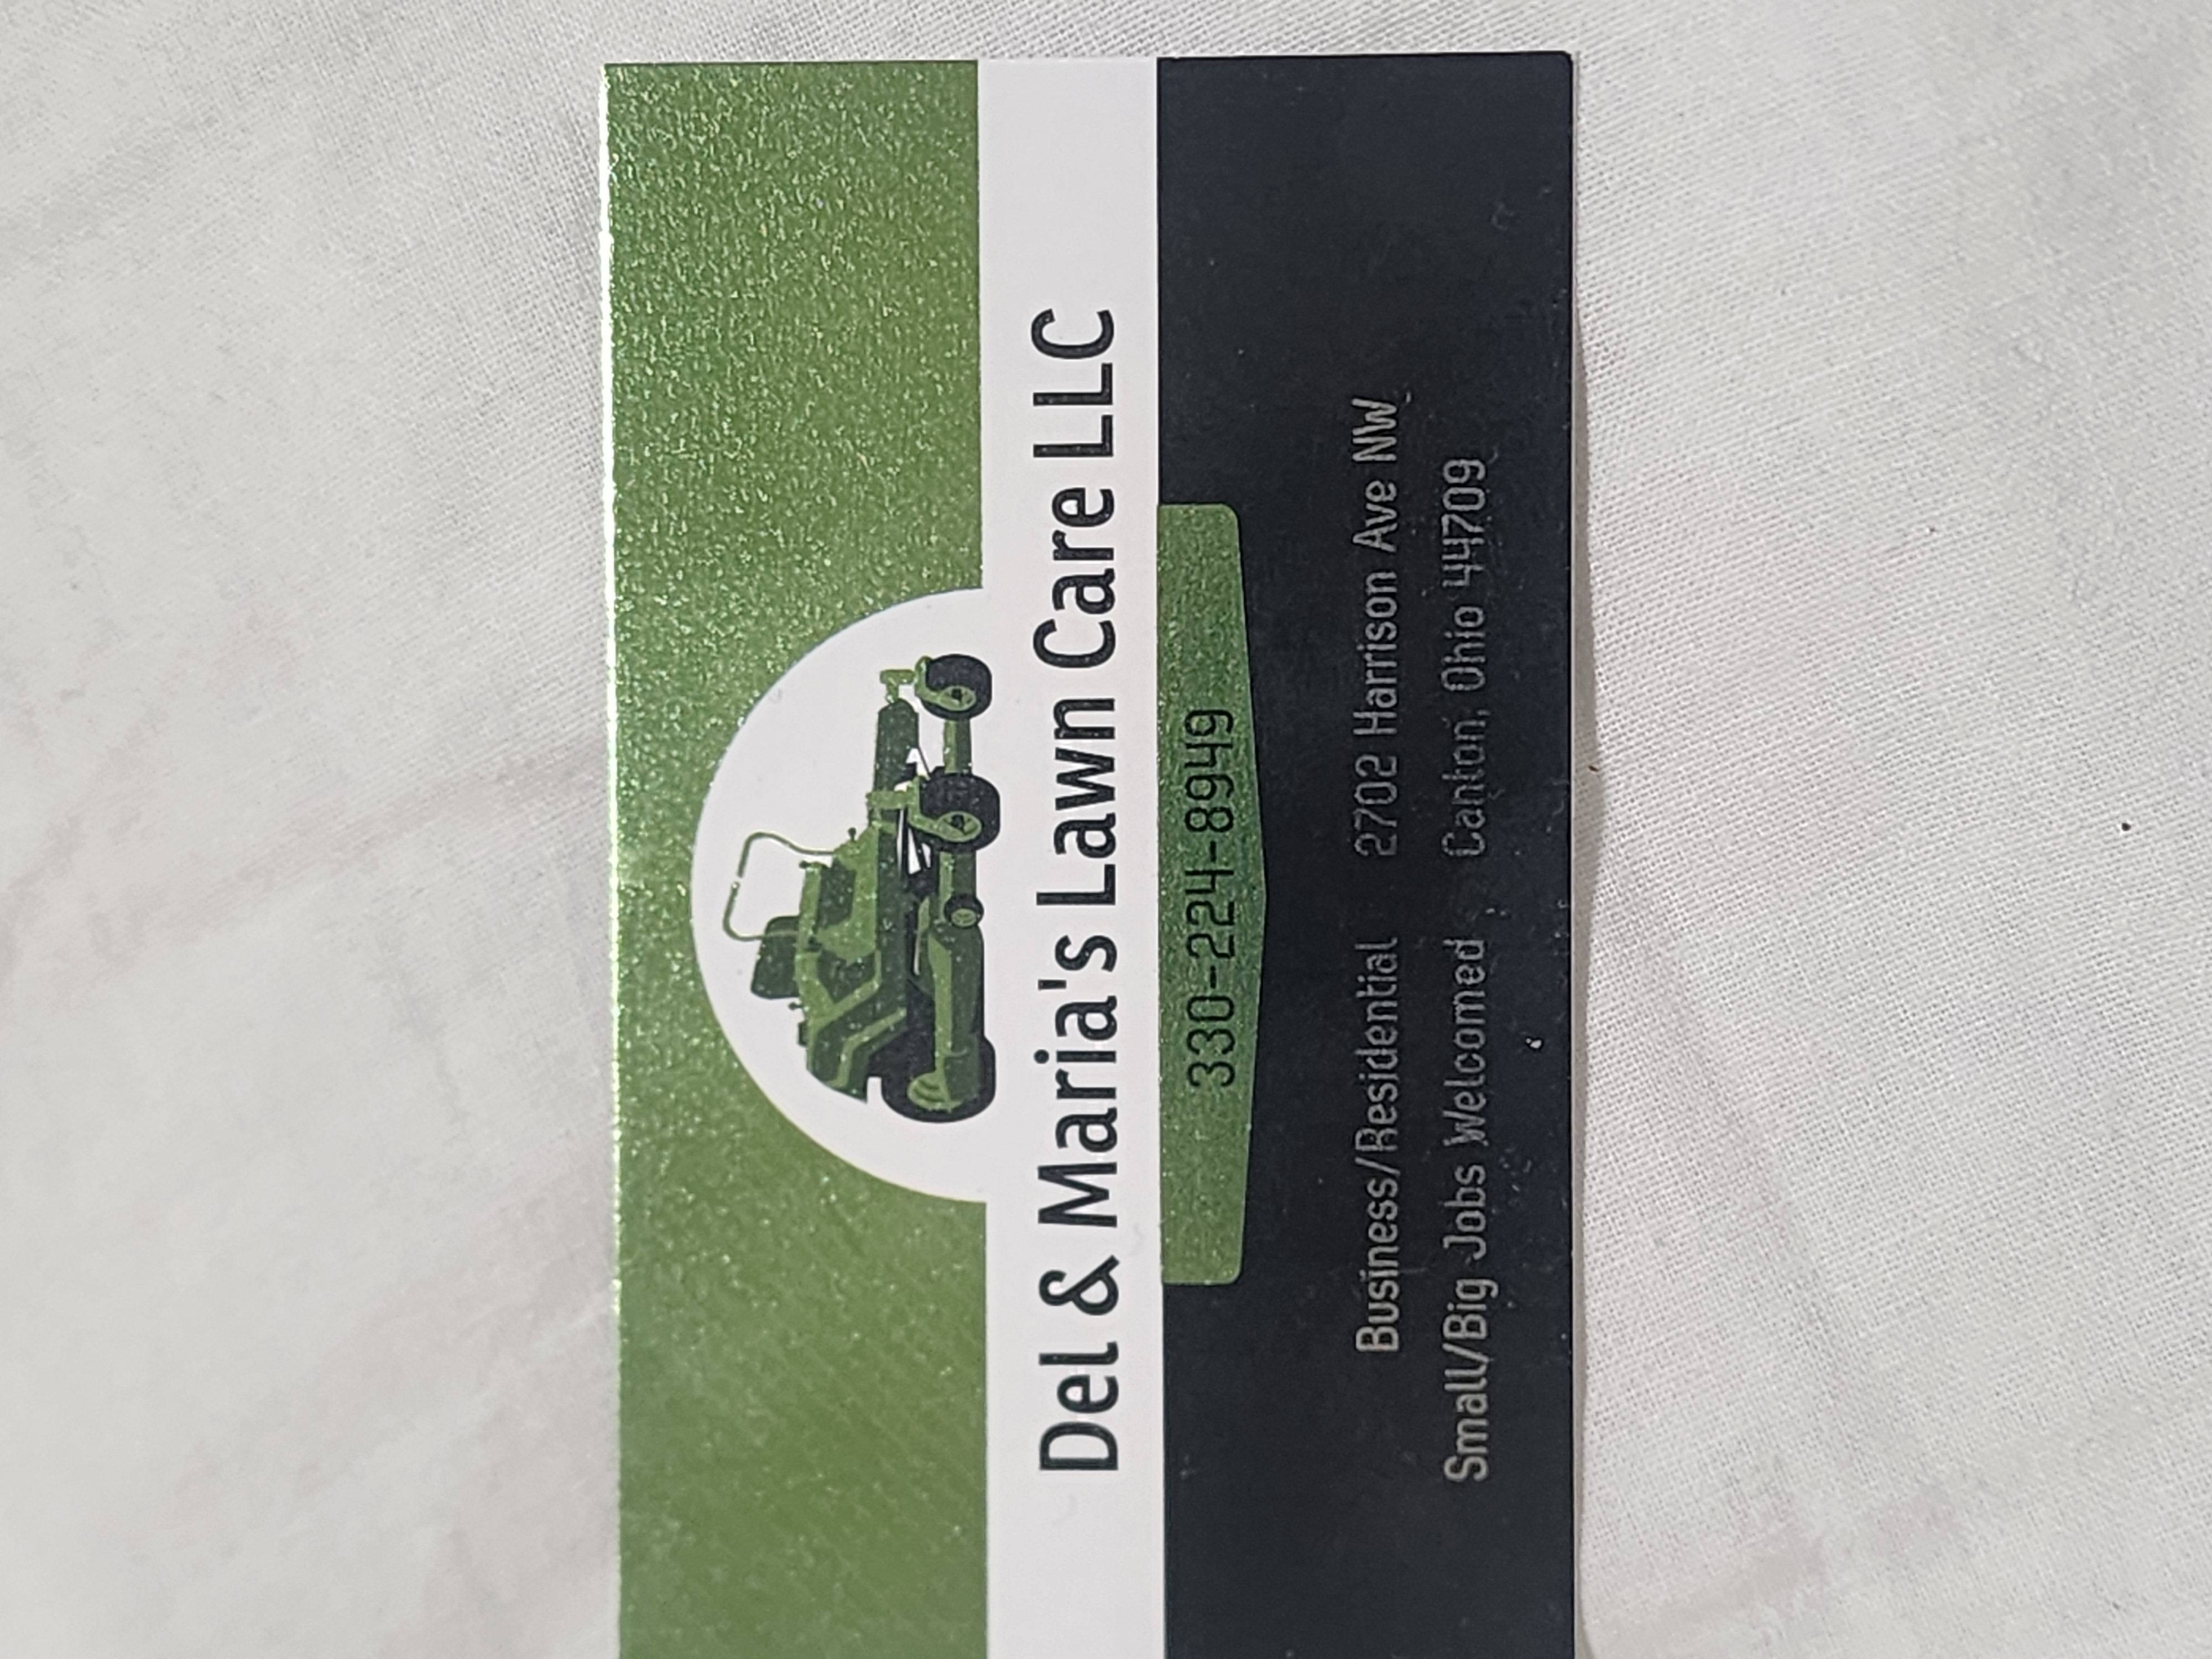 Del and Maria's Lawn Care Maintenance and Furniture Delivery Services, LLC Logo